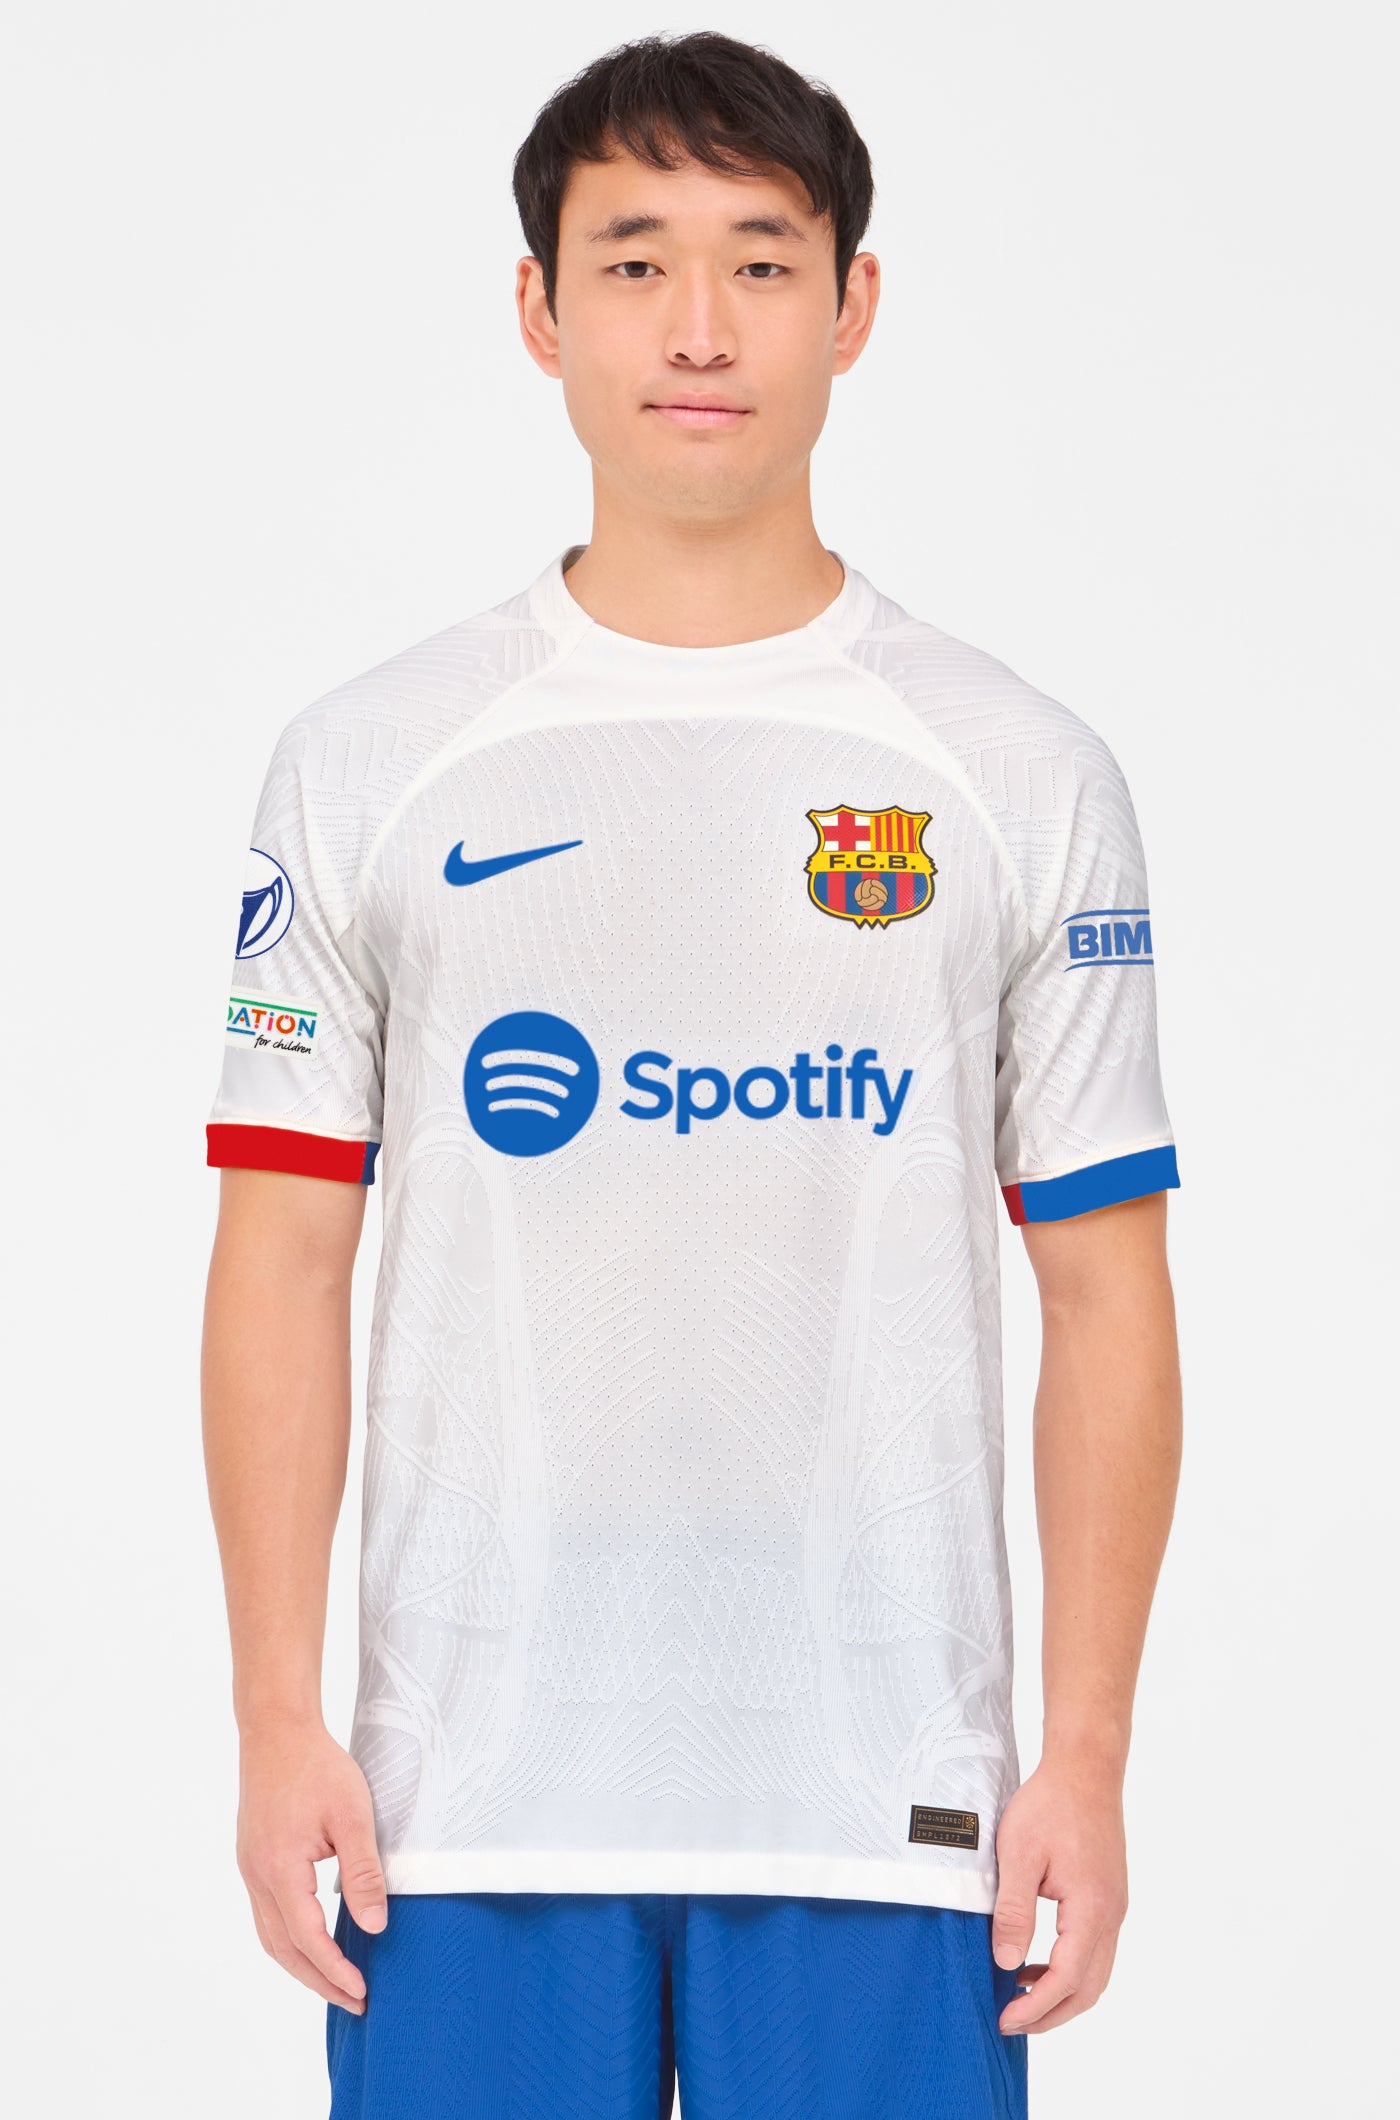 UWCL FC Barcelona away shirt 23/24 Player's Edition - PARALLUELO